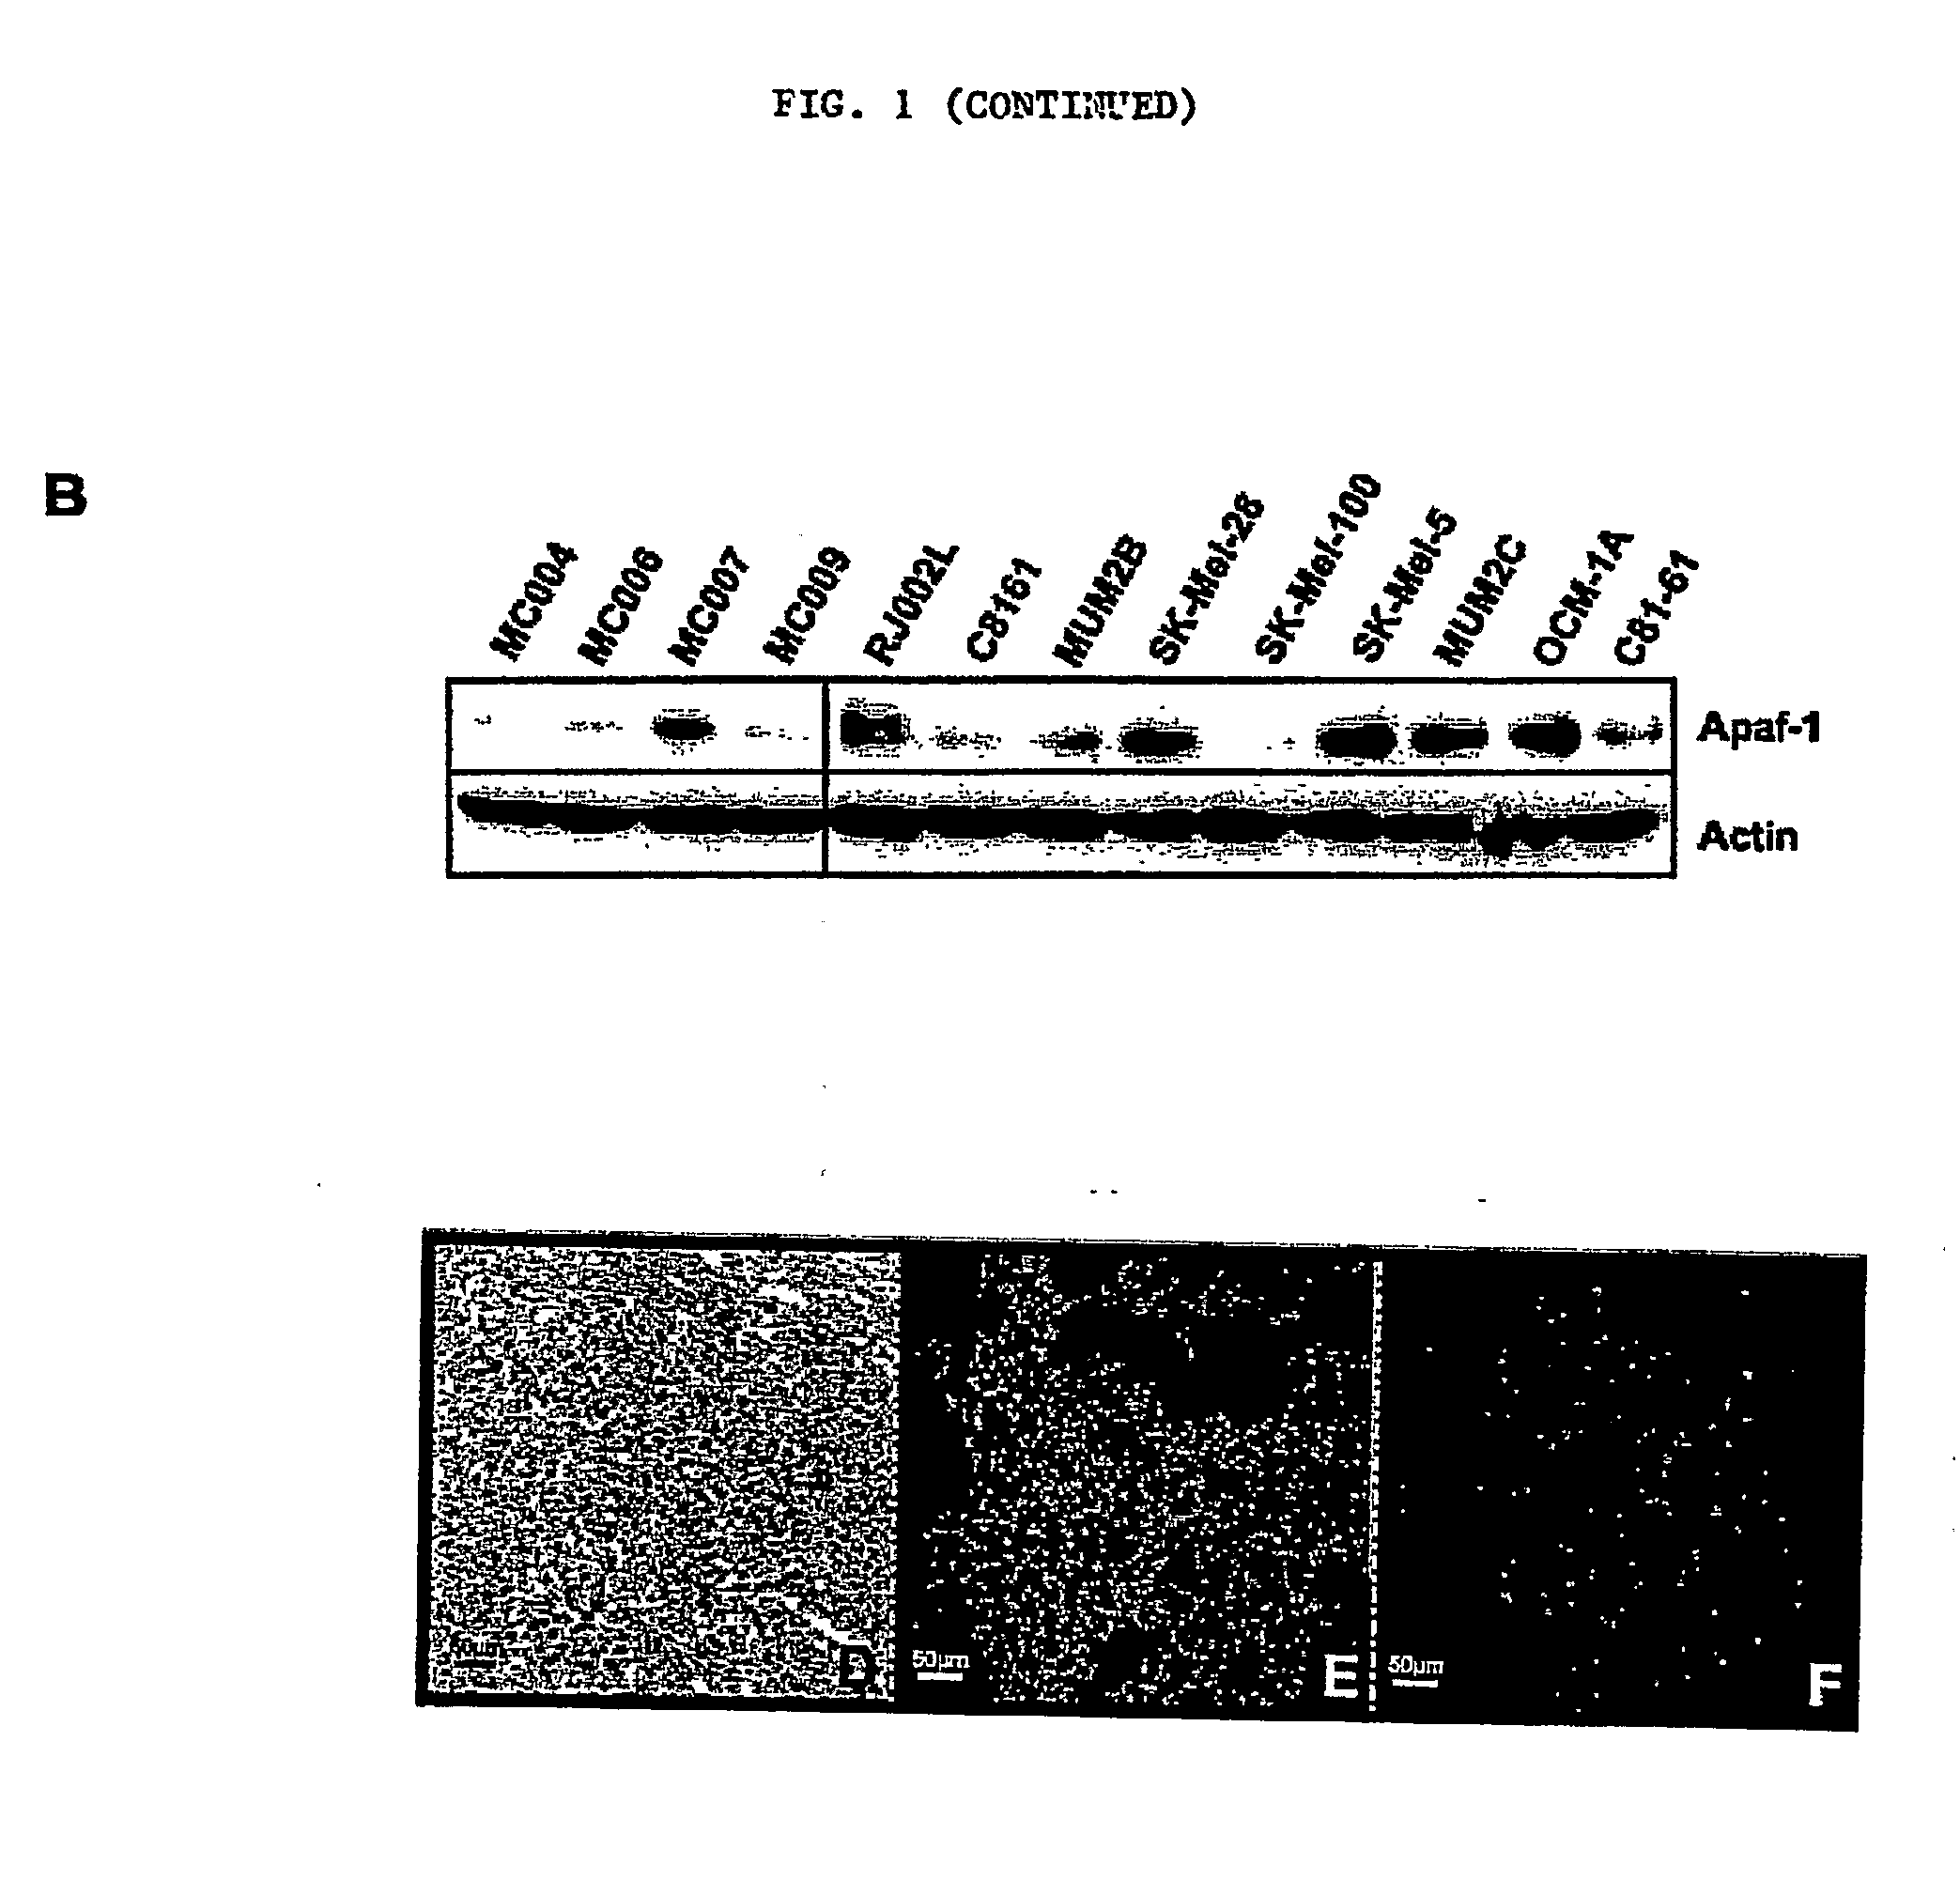 Compositions for Inhibiting Cell Growth and Inducing Apoptosis in Cancer Cells and Methods of Use Thereof